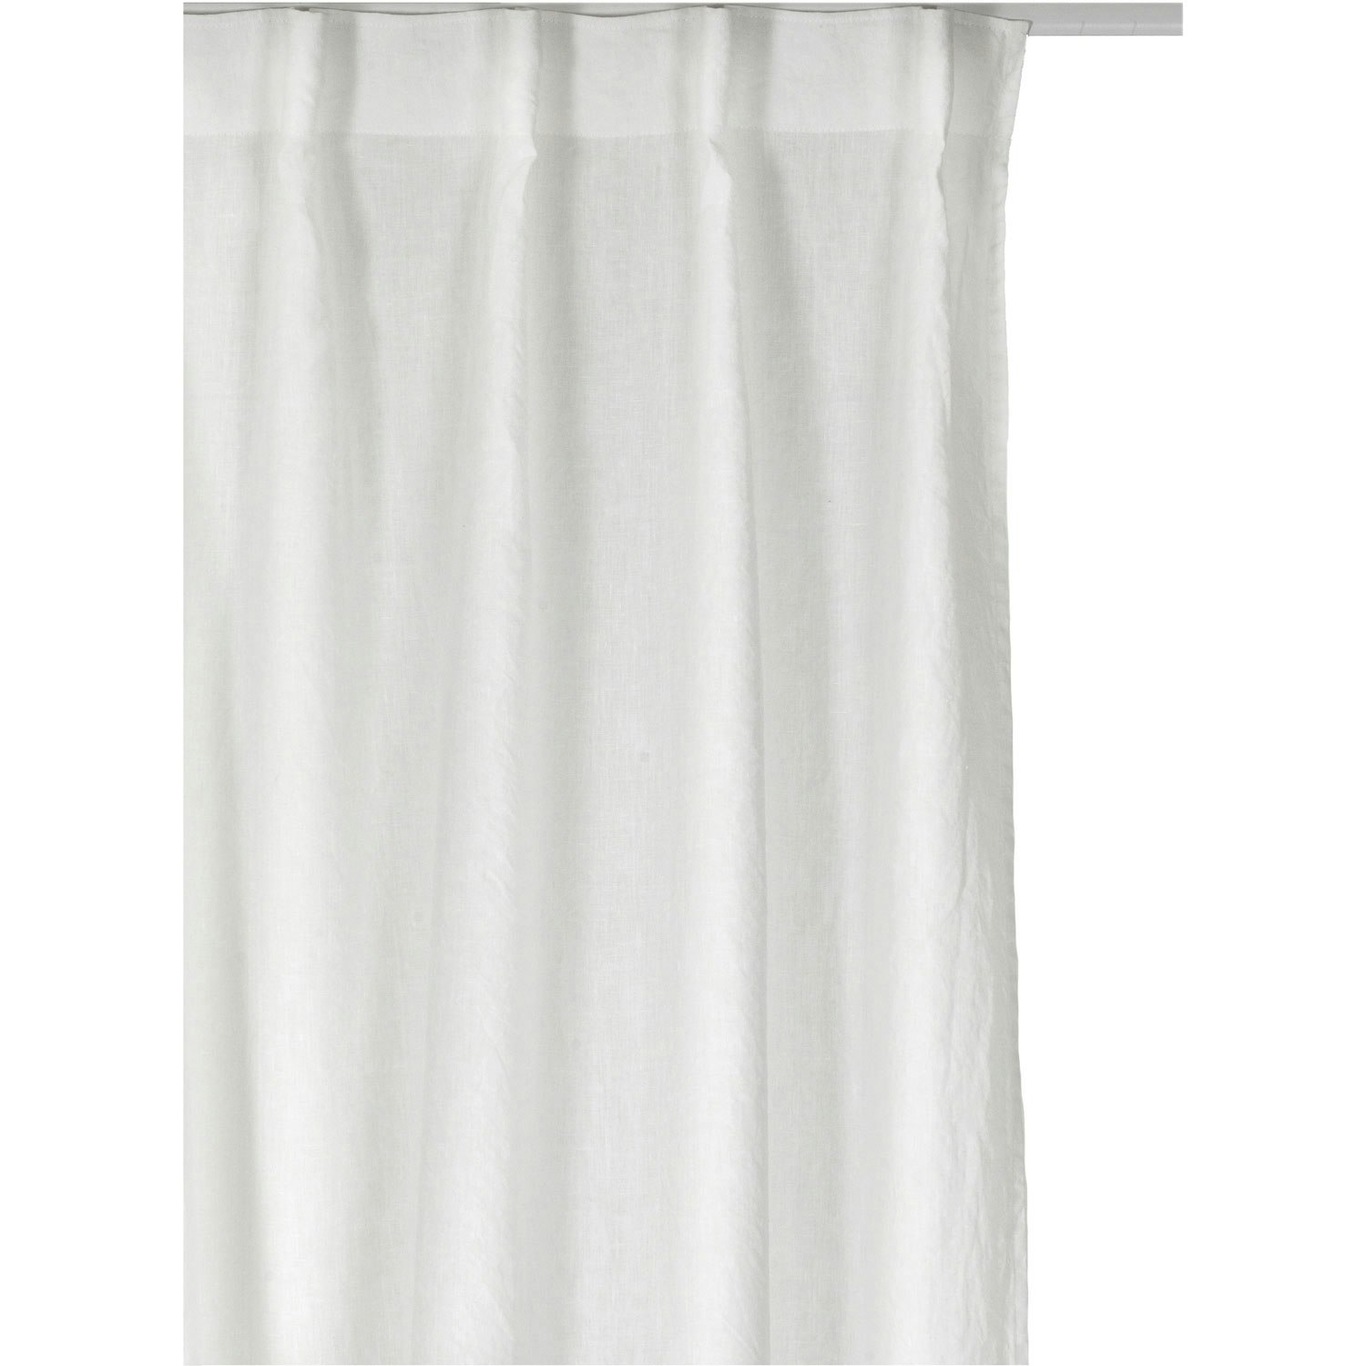 Sunrise Curtain With Pleat Band 280x290 cm, White